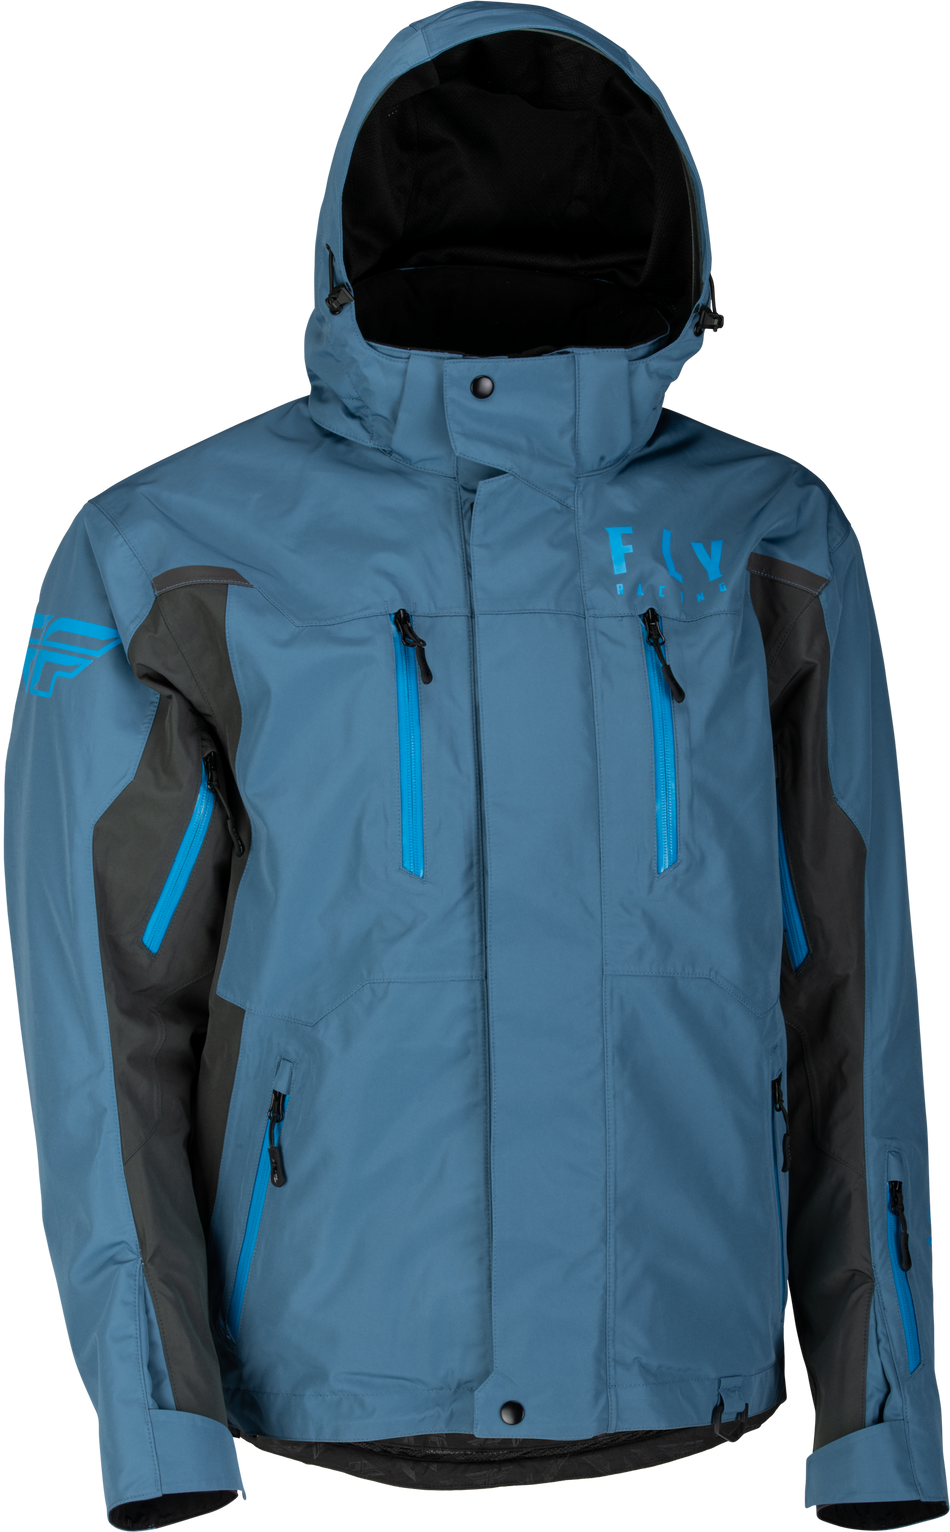 FLY RACING Incline Jacket Blue/Grey Md 470-4104M